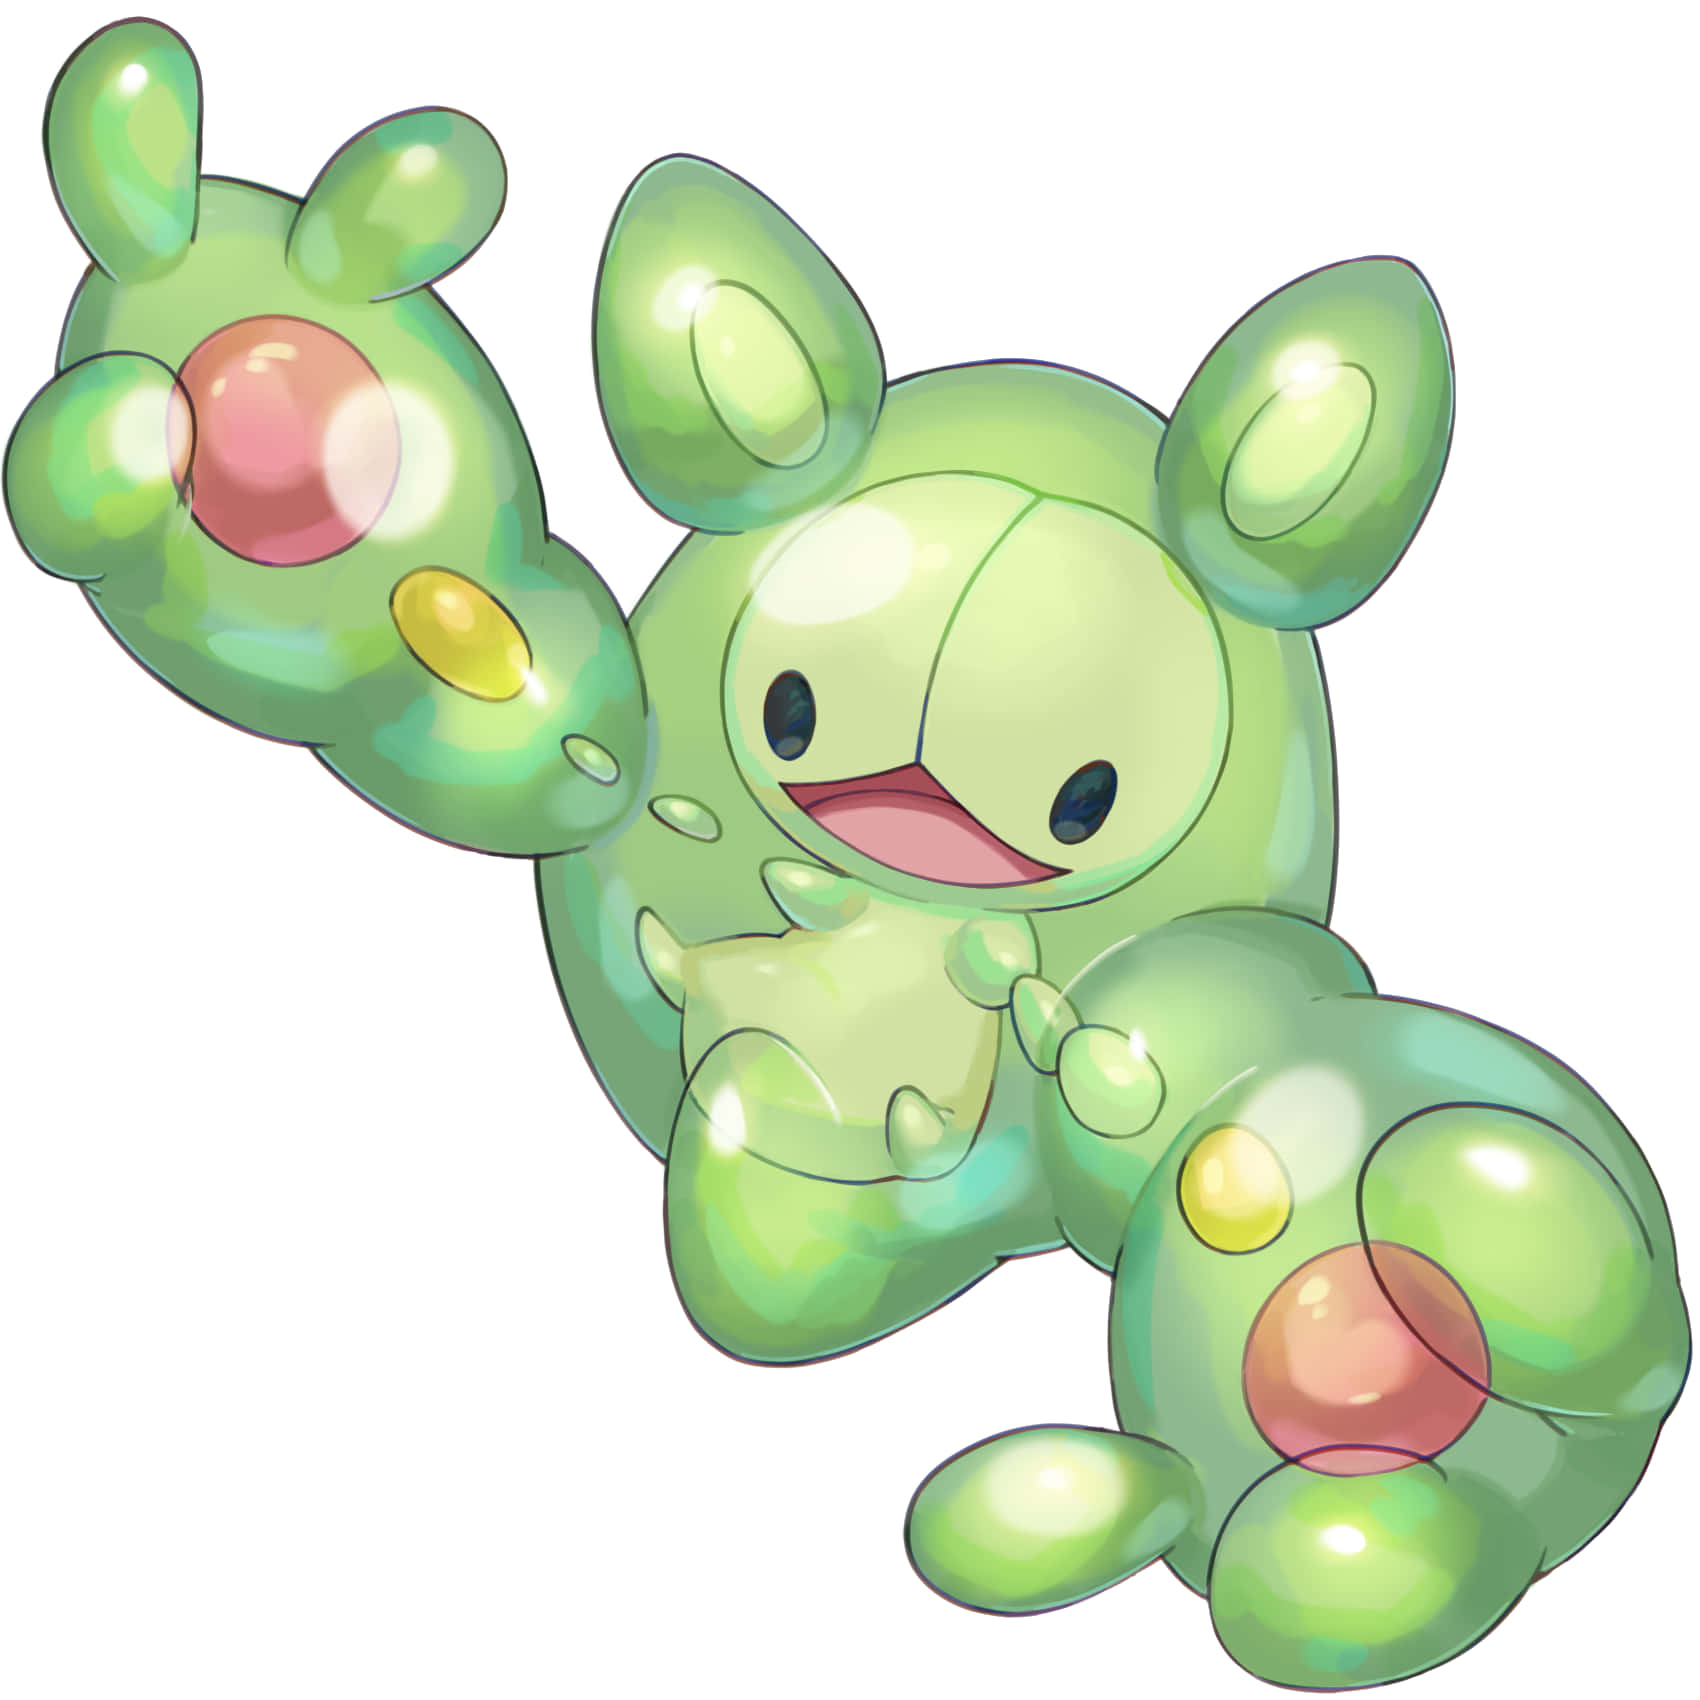 Reuniclusstarka Armar. (assuming This Is A Title Or Name For A Wallpaper Design Featuring Reuniclus With Strong Arms.) Wallpaper